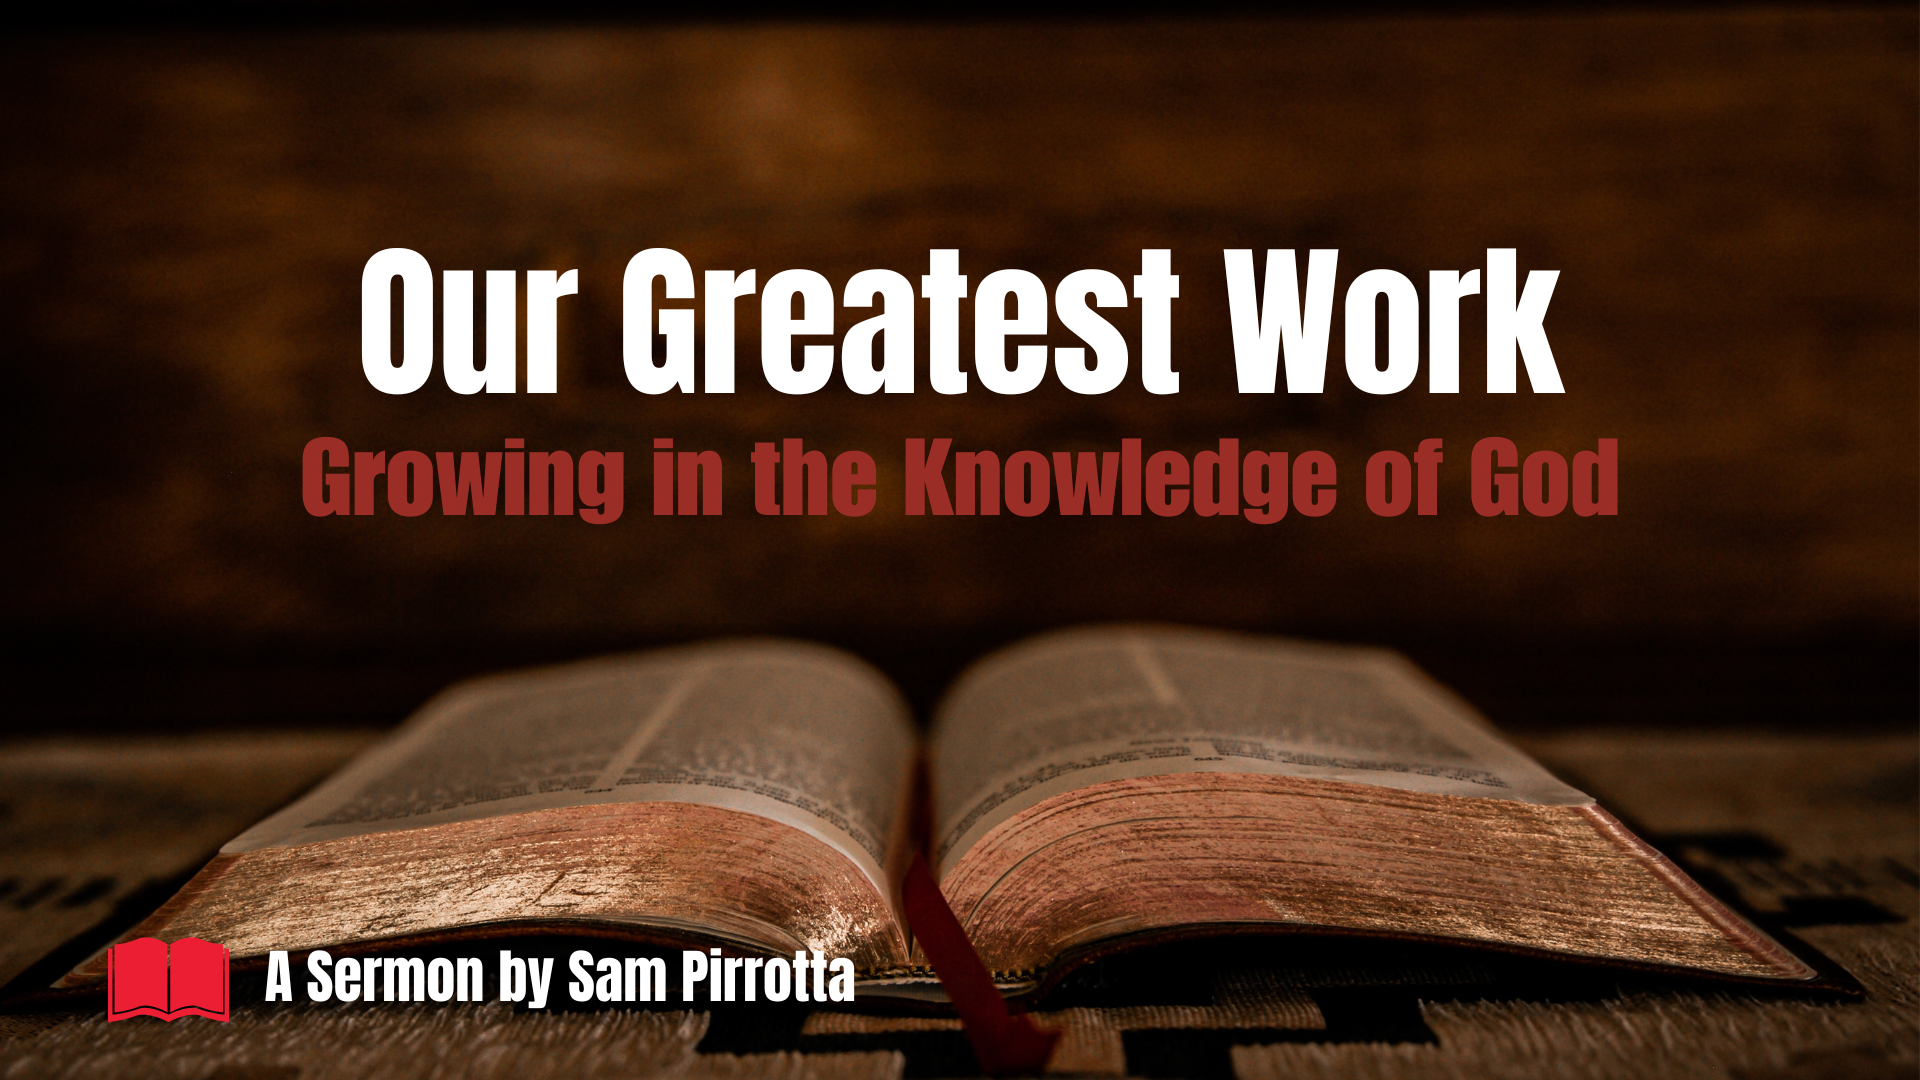 Our Greatest Work: Growing in the Knowledge of God